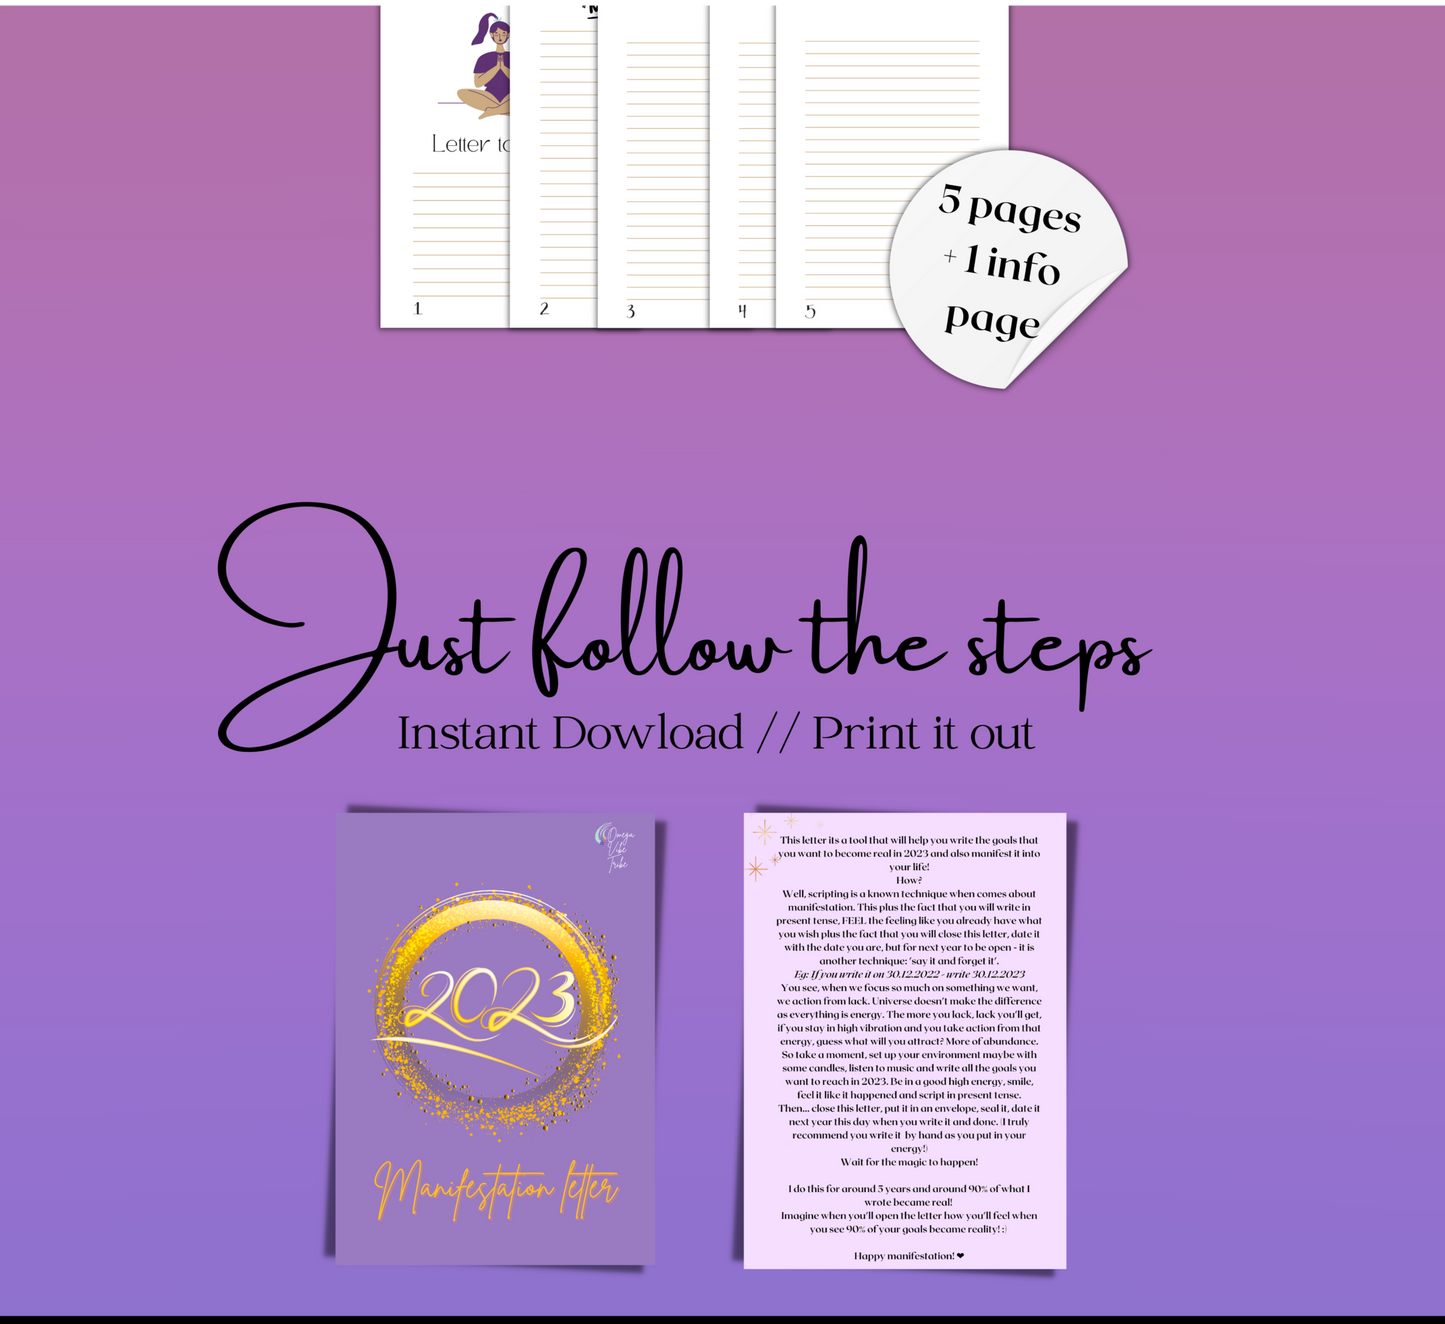 photo features the steps to download, the digital product being an instant download. this manifestation letter can be printed out also.